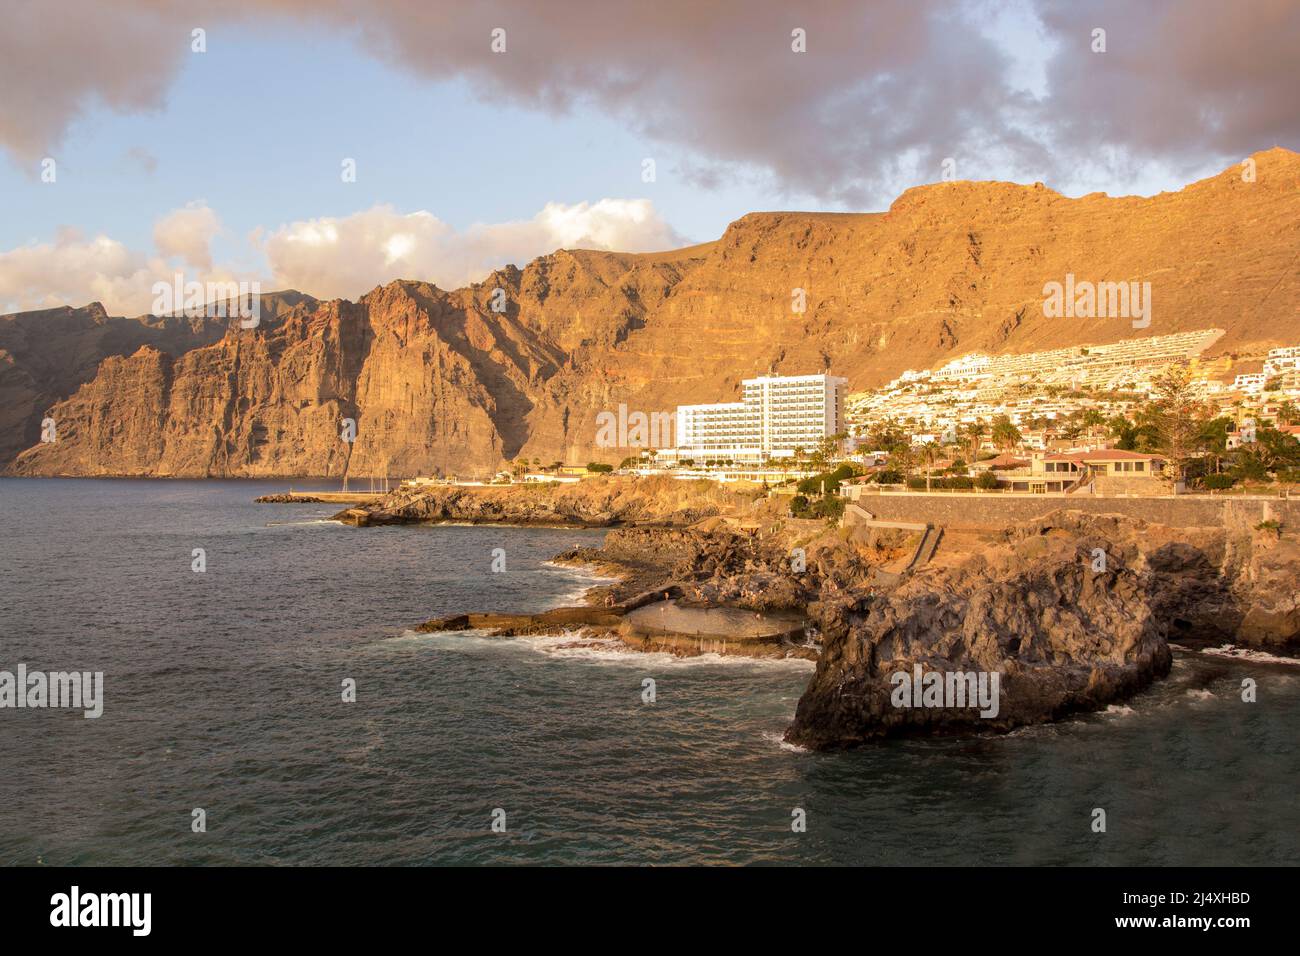 The view of famous cliffs and natural, rock pool in Los Gigantes. Tenerife, Canary Islands, Spain. Stock Photo